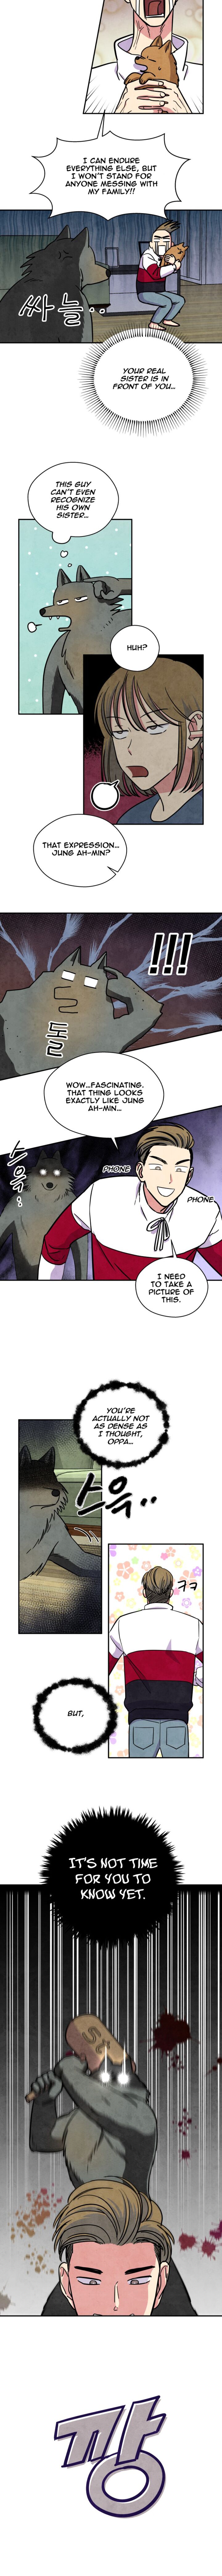 The Little Red Riding Hood Chapter 32 Page 2